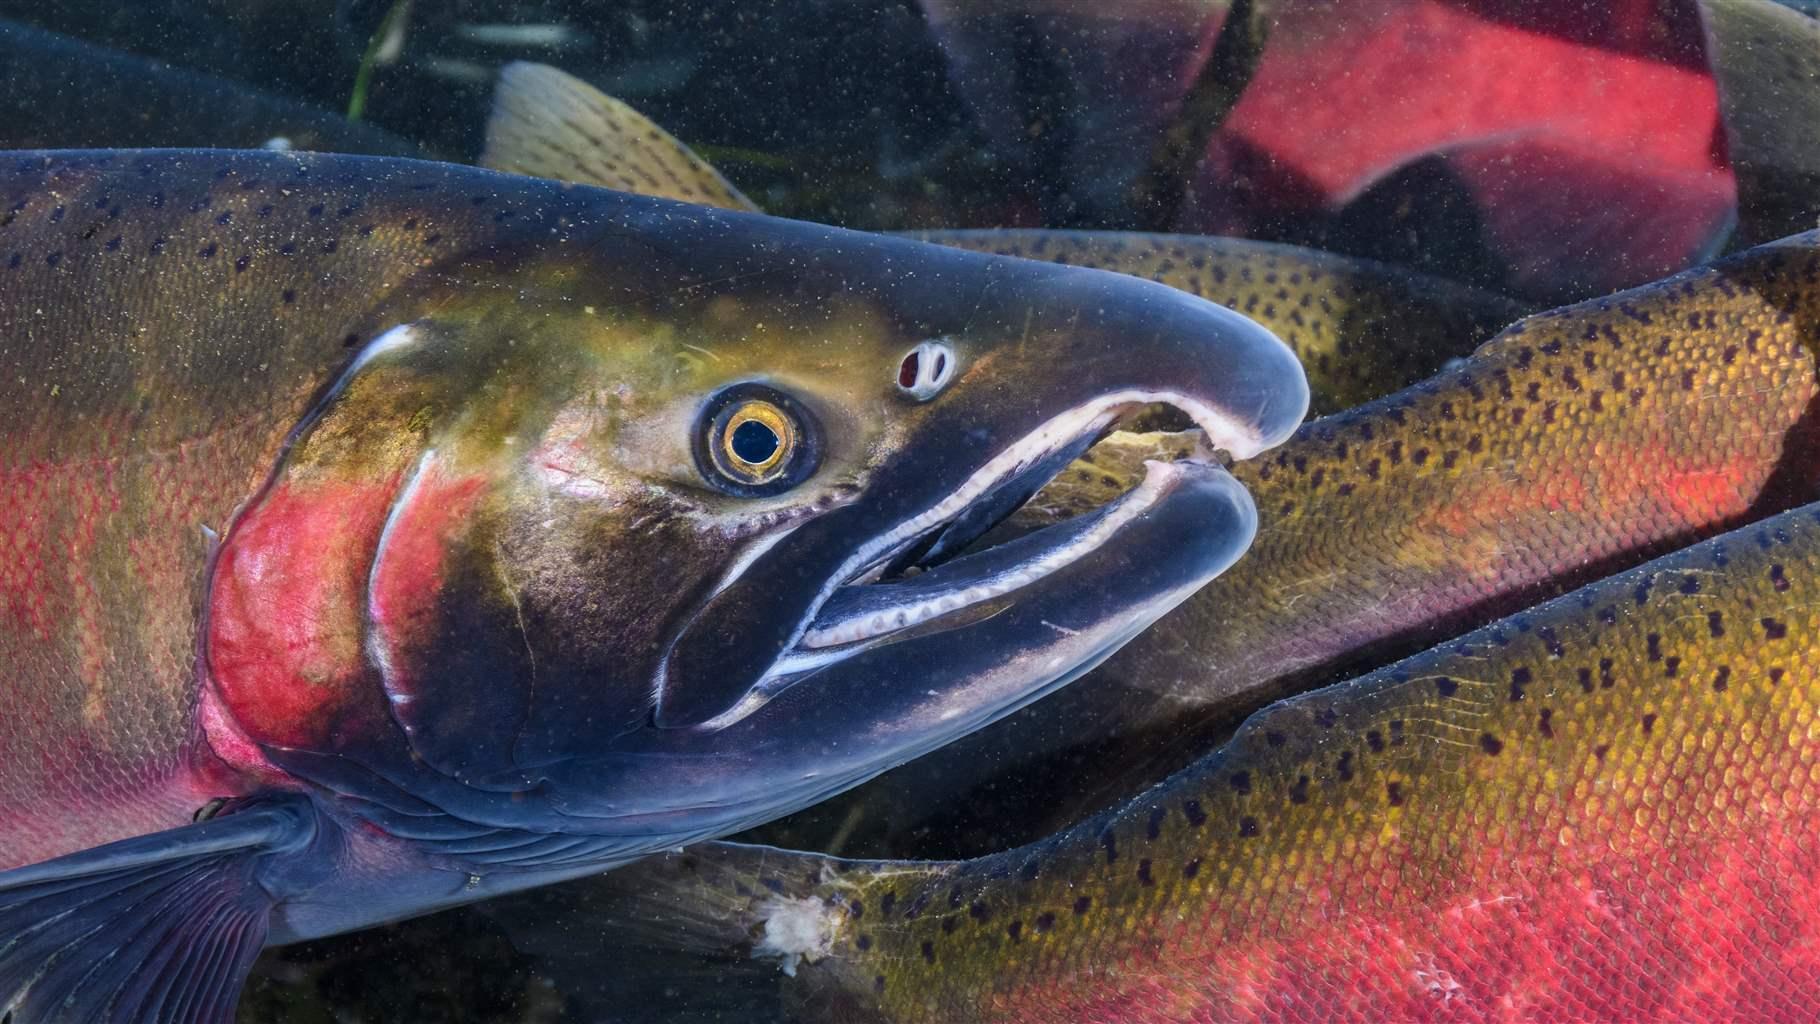 Oncorhynchus kisutch stock photograph taken in the wild, coho salmon swimming upriver to spawn in Washington, USA, licenses sold permitting editorial or commercial usage